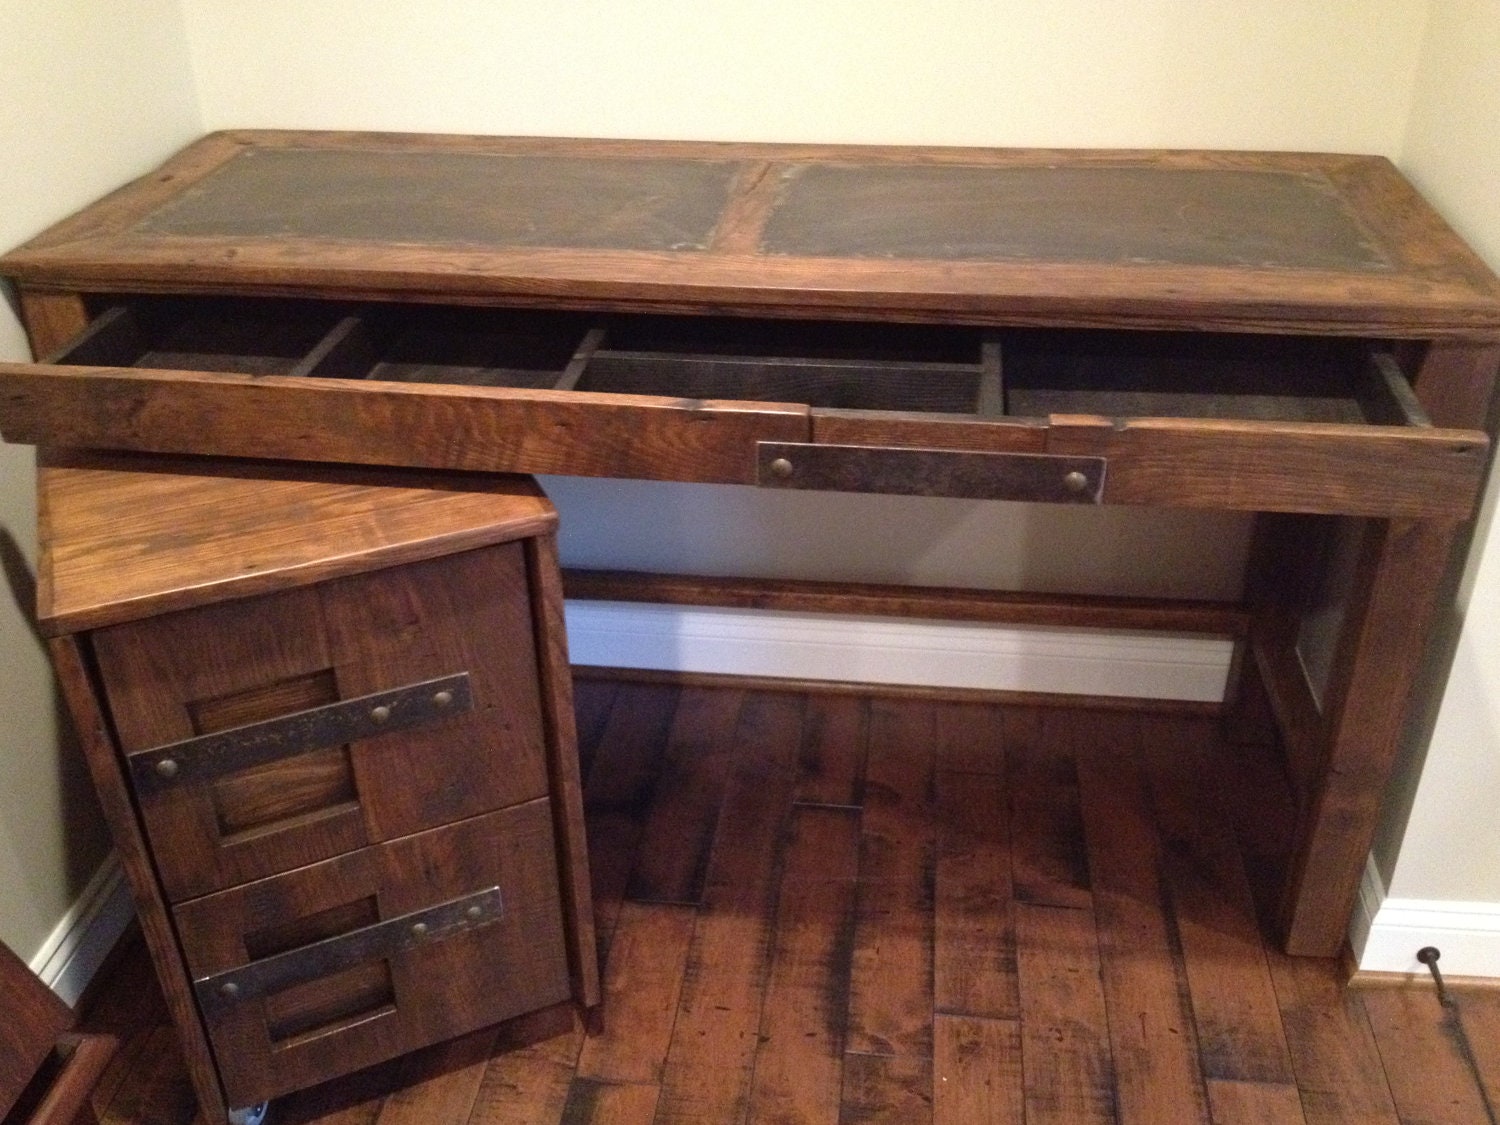 Steel Top Desk and File Cabinet